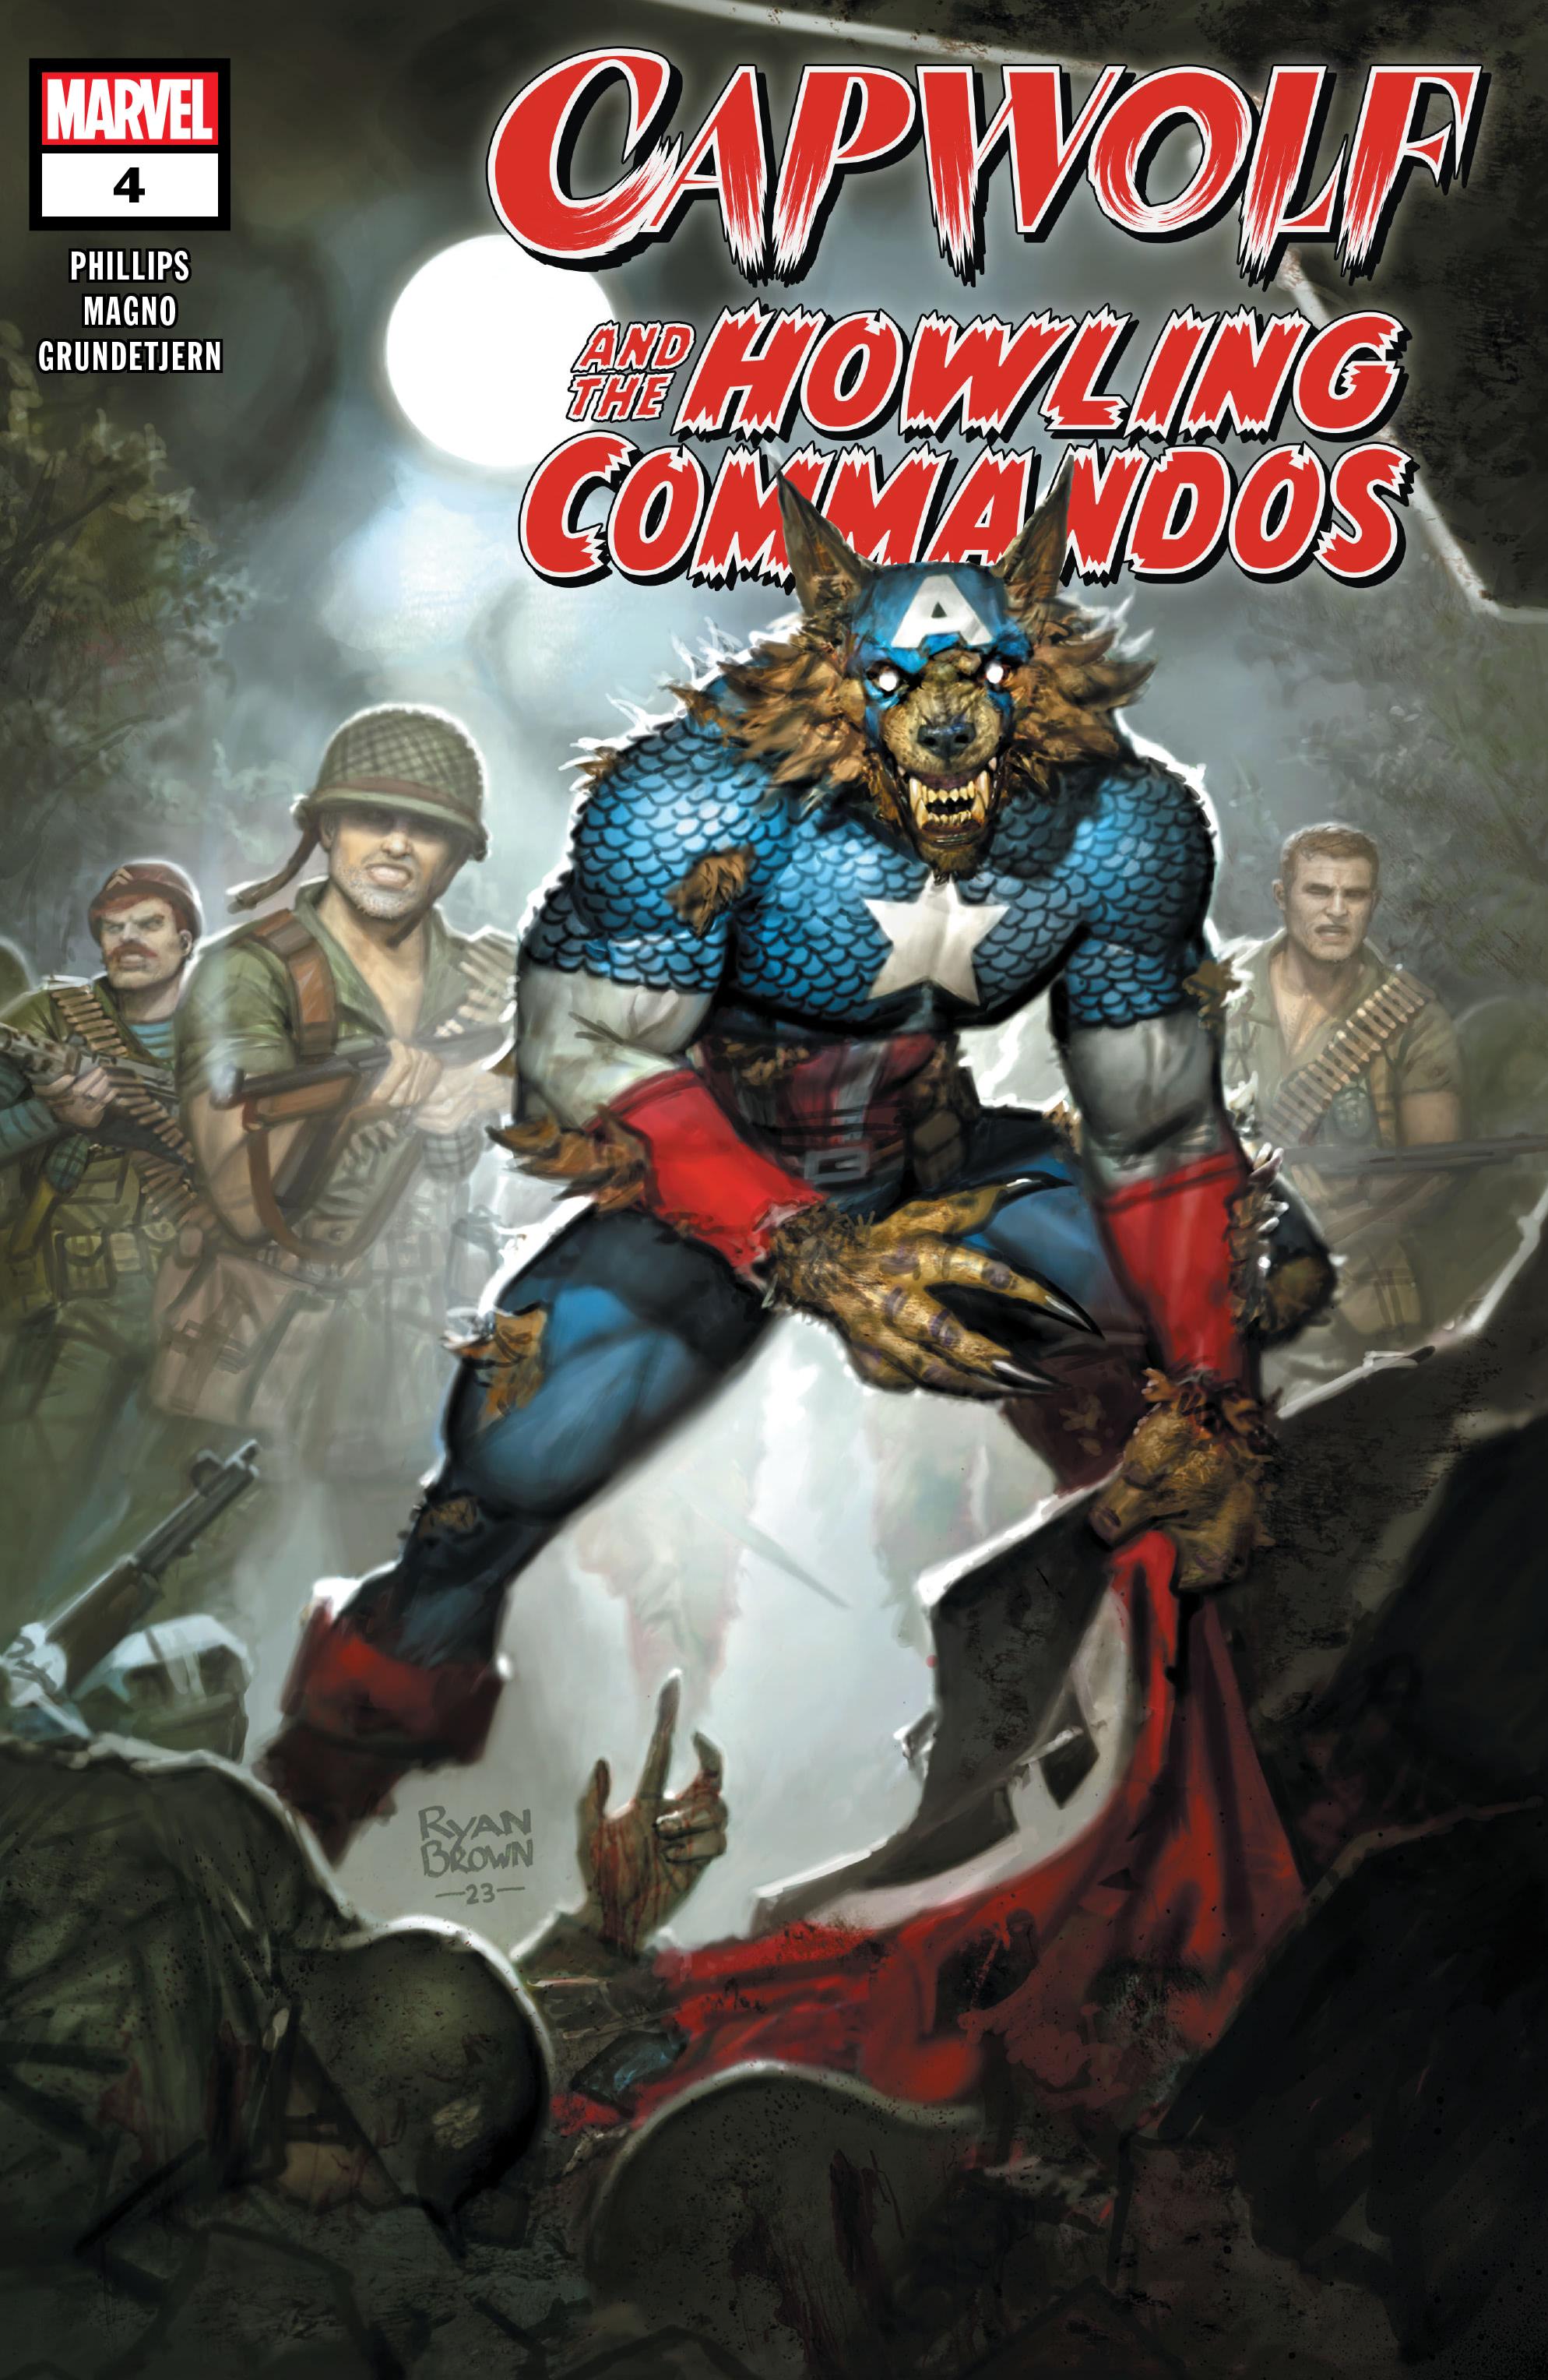 Read online Capwolf and the Howling Commandos comic -  Issue #4 - 1